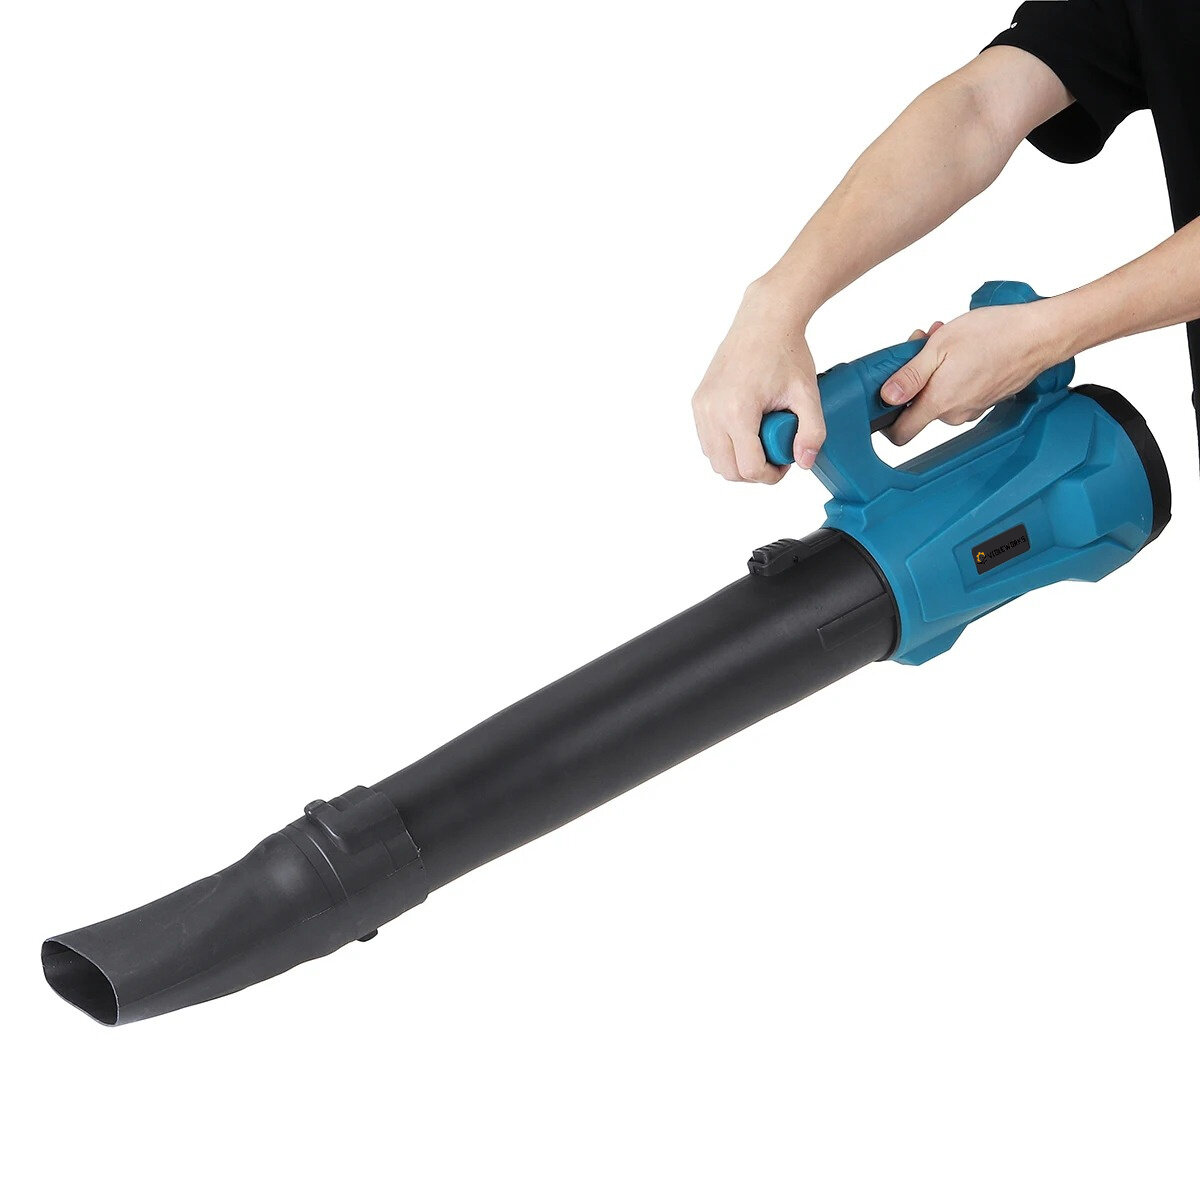 

VIOLEWORKS Cordless Electric Air Blower 6 Speeds Handheld Leaf Blower Dust Collector Sweeper Garden Tools Compatible 18V